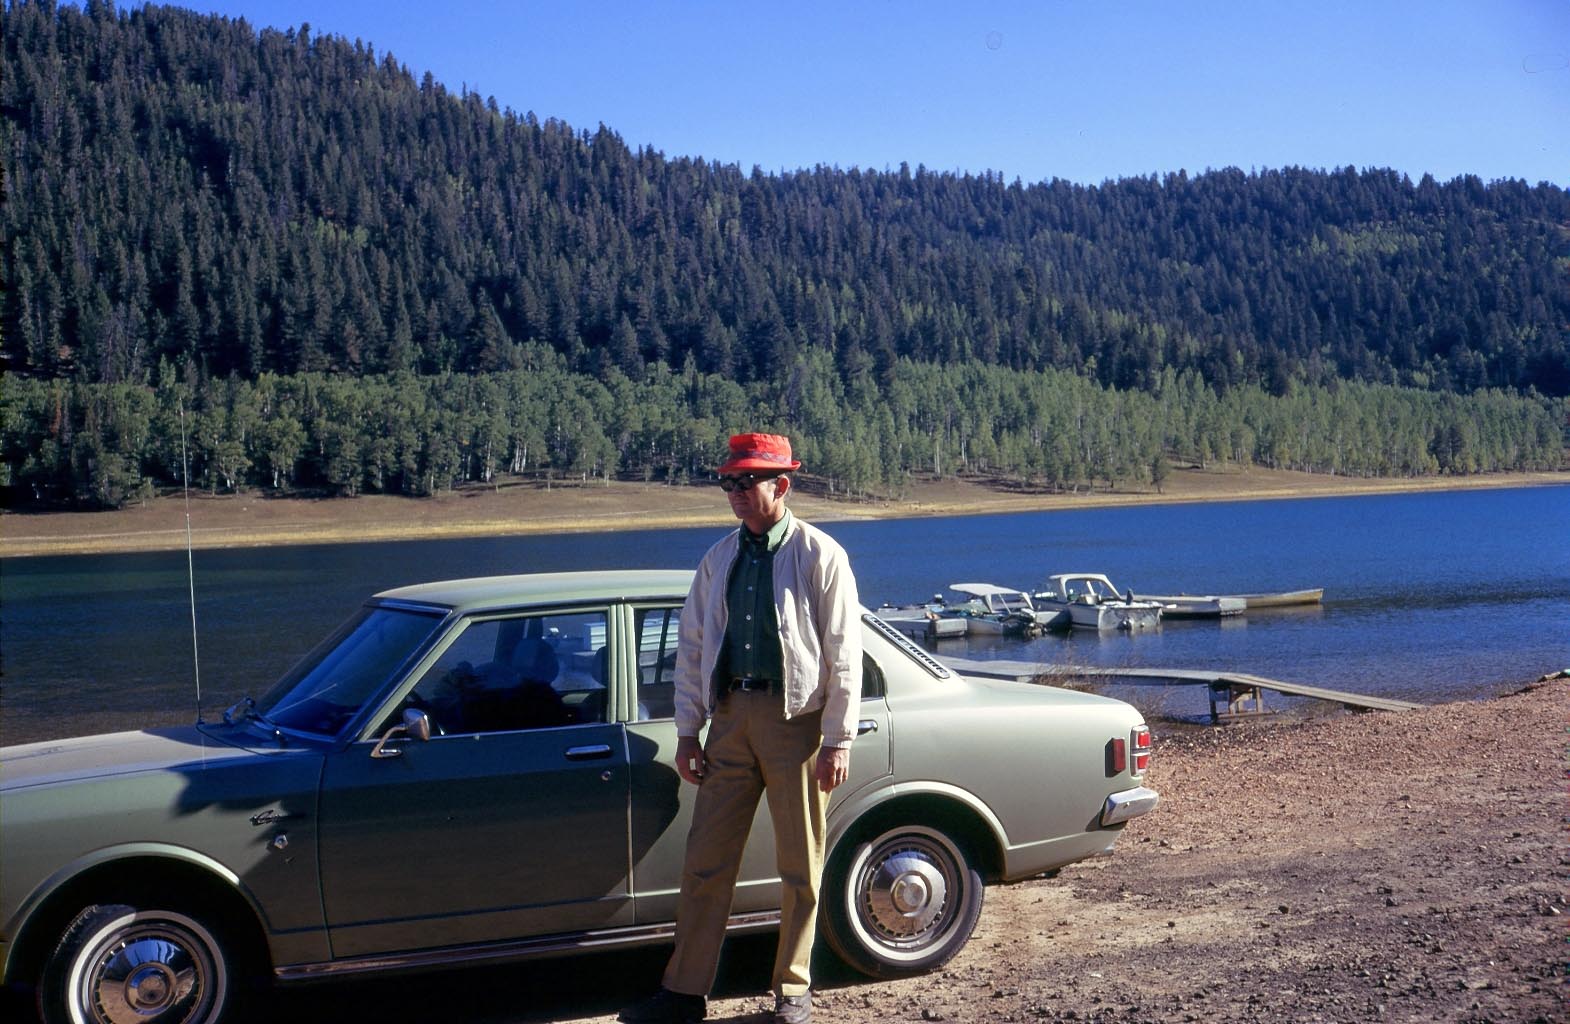 Southern Utah, and my father with our 1971 Toyota Corona. He taught me how to drive stick shift in this car, and several years later, I bought it and drove it for a few more years. 

Our cabin would be built near this lake. Good memories.

